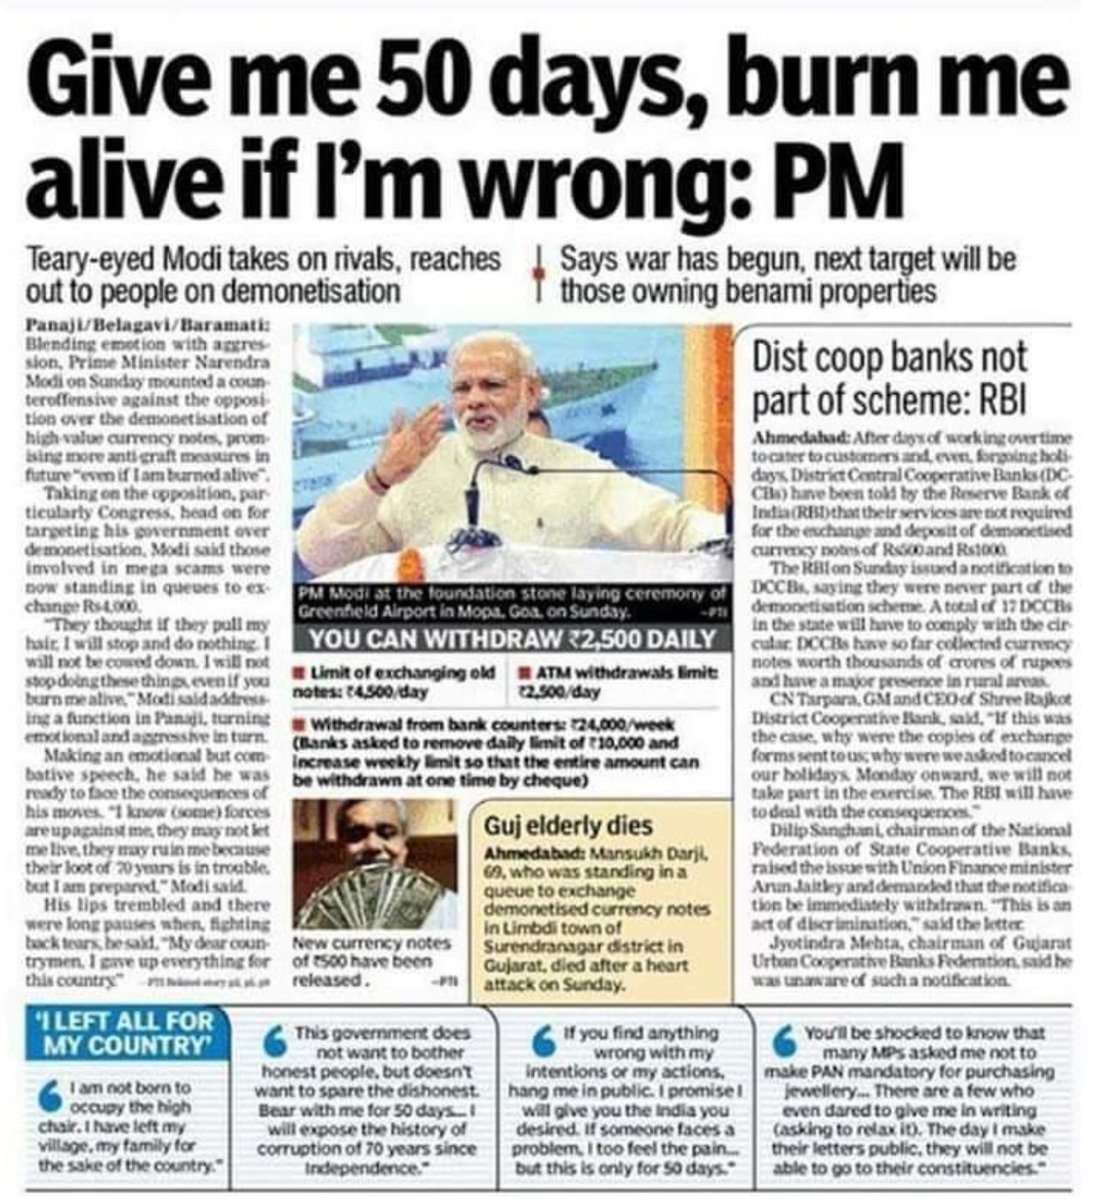 Share and retweet if you remember .. a #Nautanki s quote on this #ChipAnniversaryDay #DemonetisationDisaster #justasking